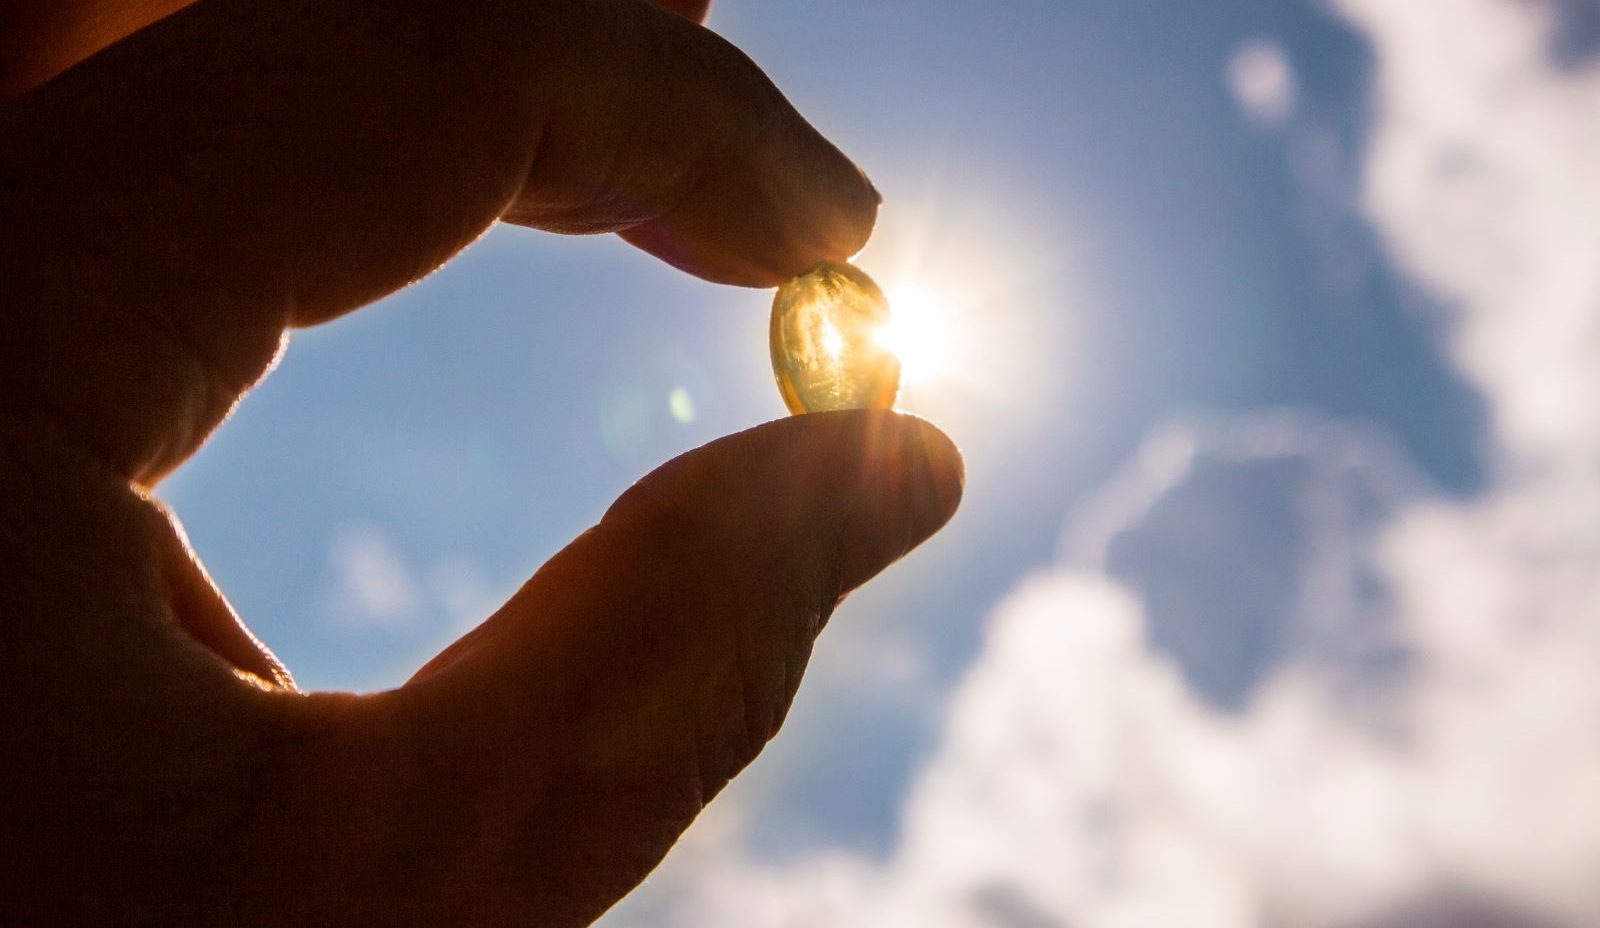 New Studies Cast Doubts on Vitamin D Supplements, but Do the Experts Agree?